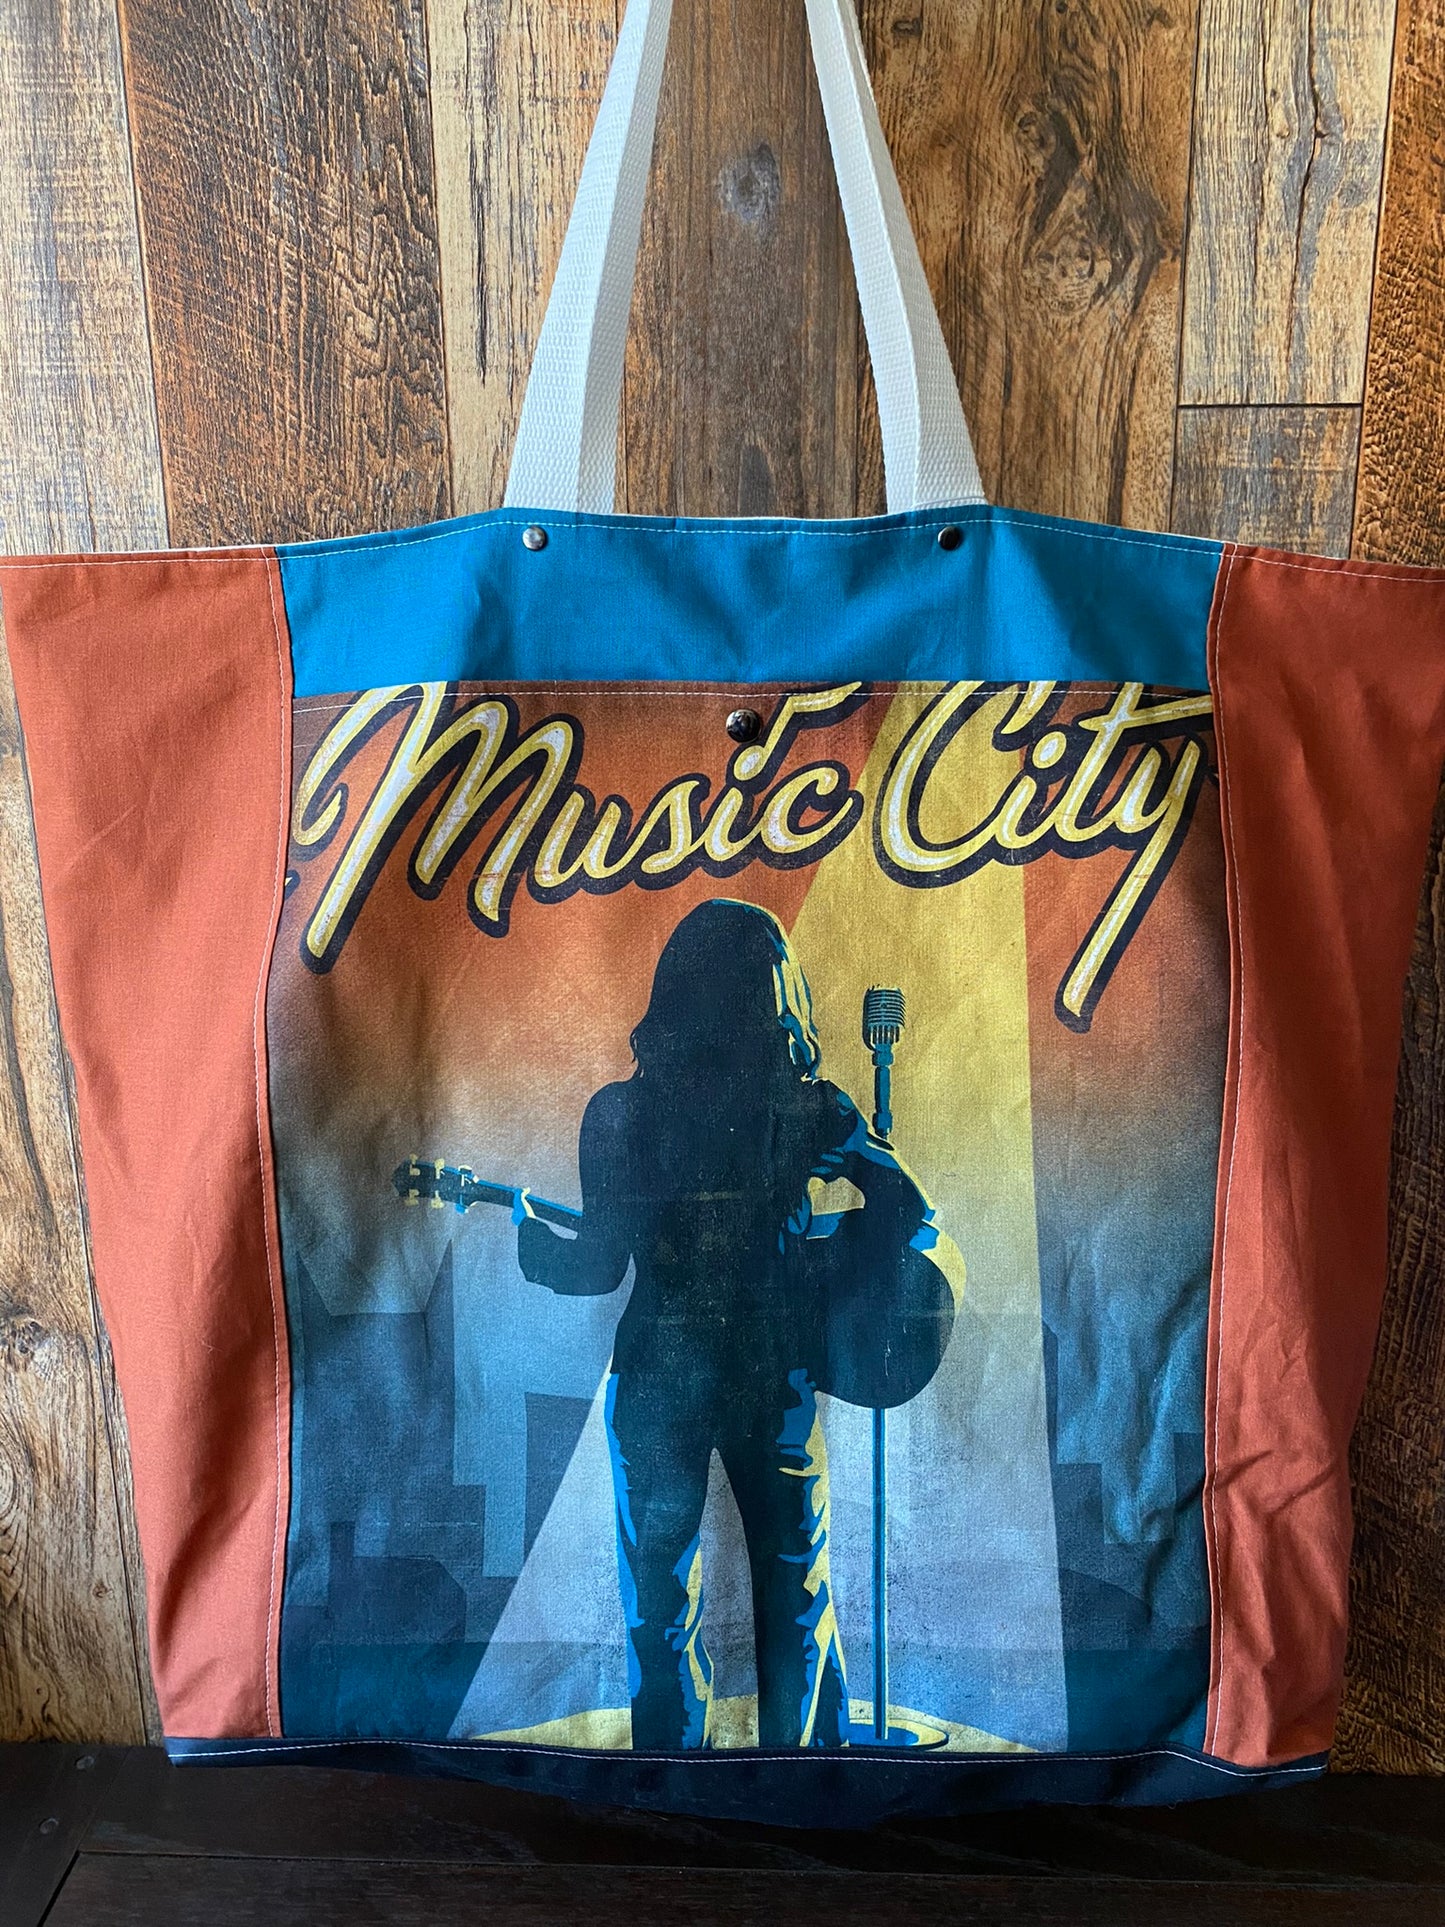 Nashville Music City Extra Large and Lightweight Project or Festival Bag